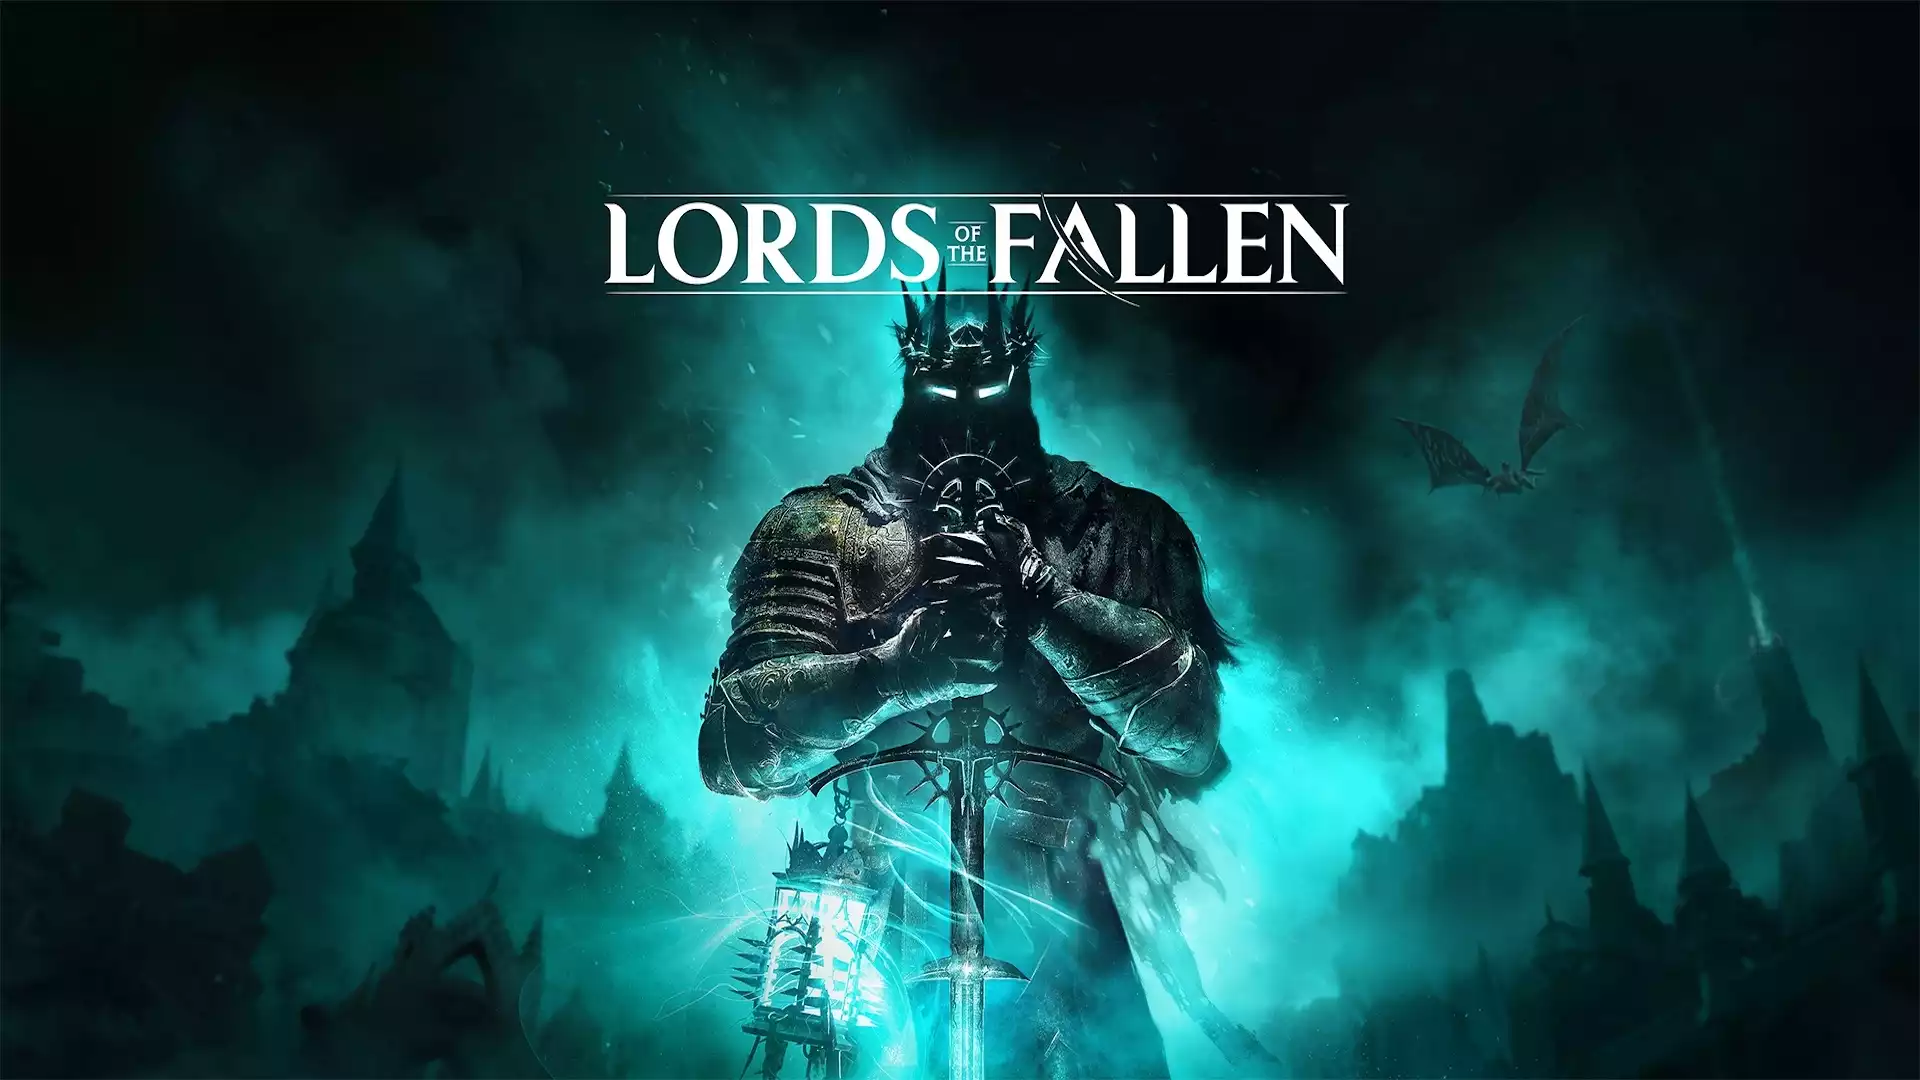 Lords of the Fallen review: Slain by technical issues